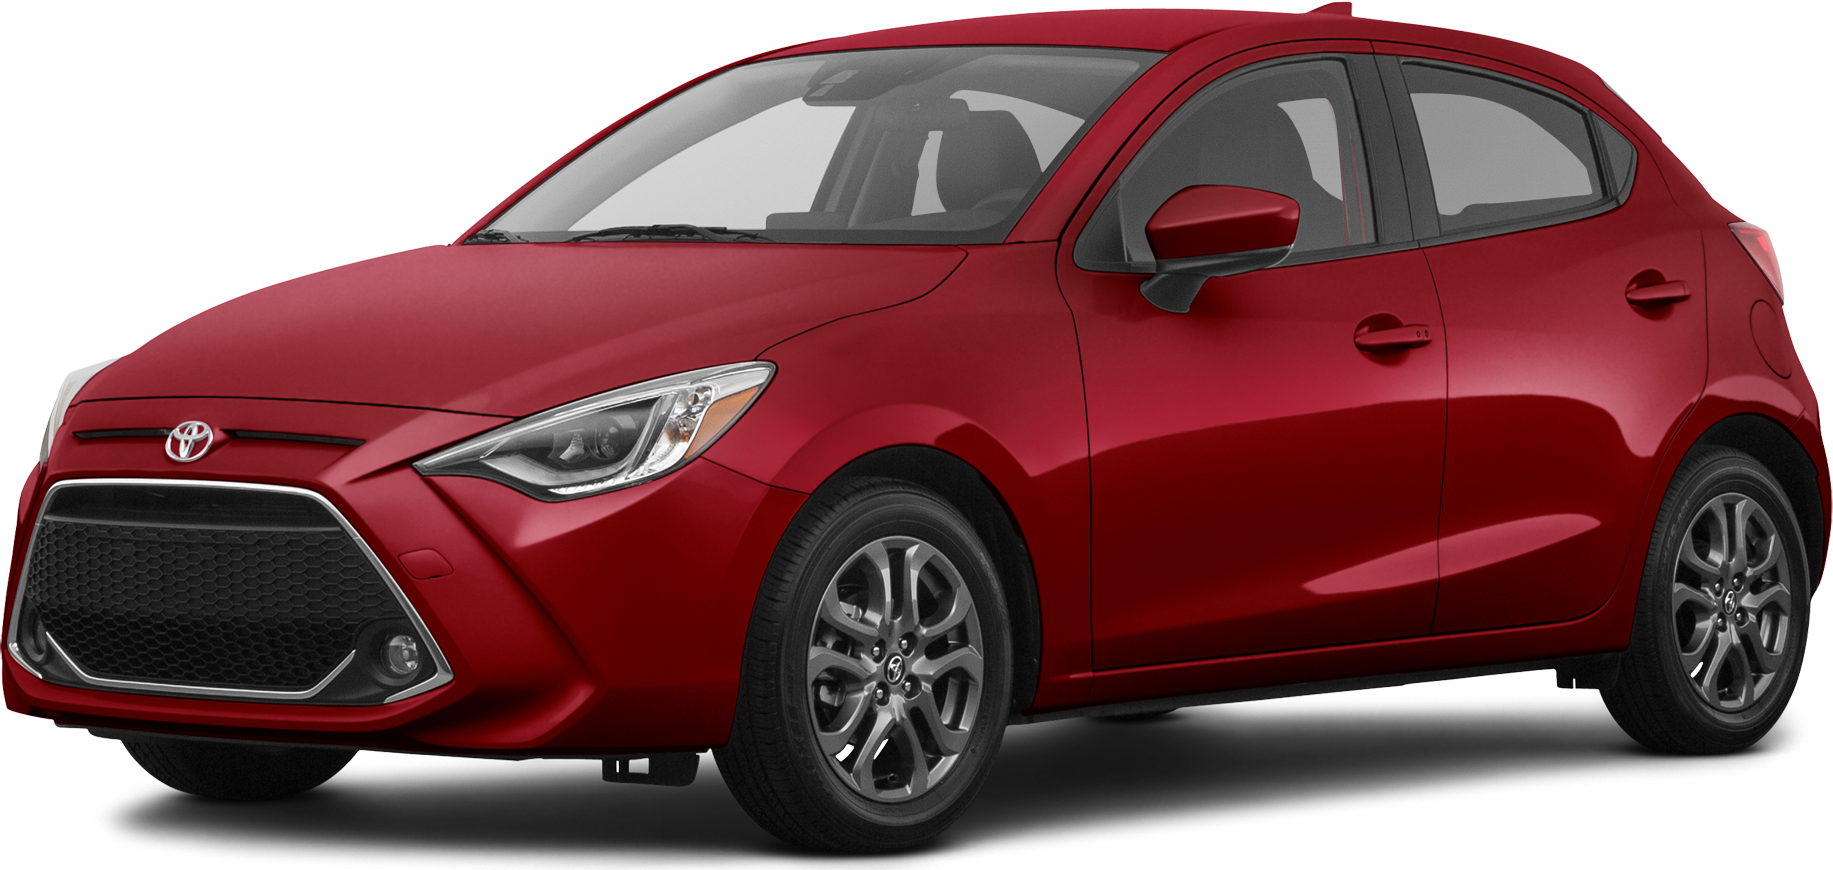 2020 Toyota Yaris Hatchback Price Value Ratings And Reviews Kelley